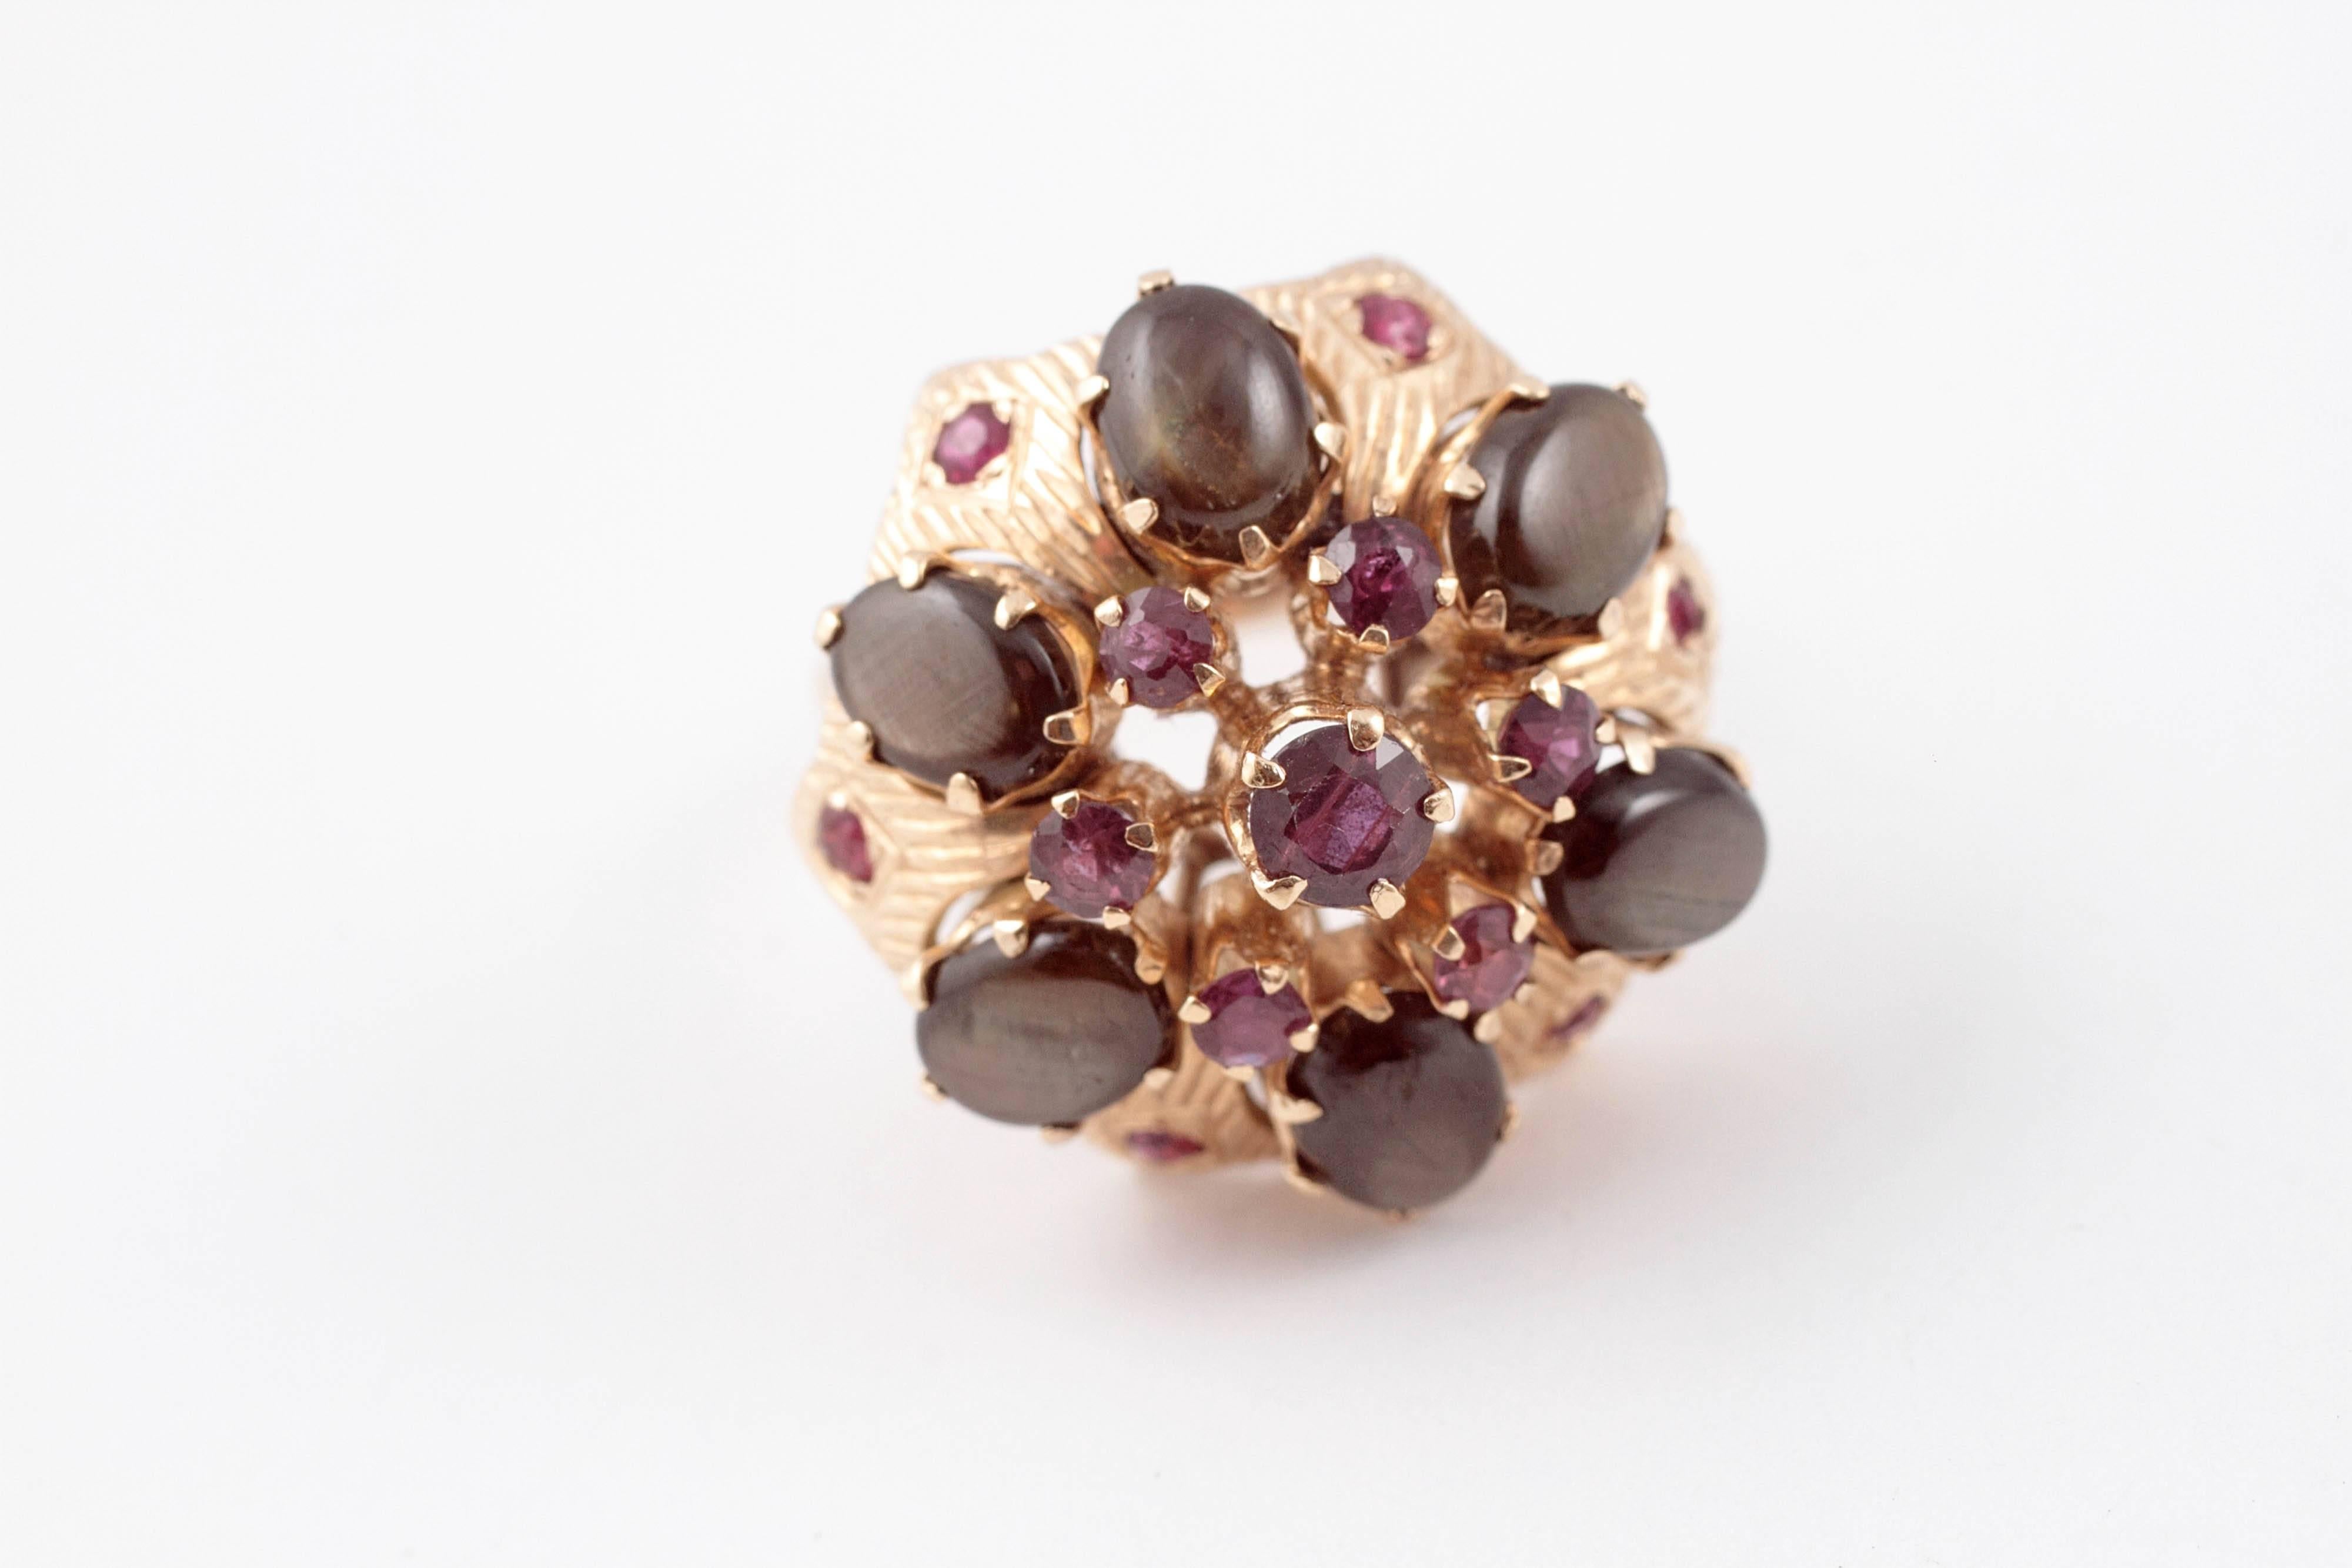 Black star sapphires and rubies adorn this 18 karat yellow gold flower-style ring. Size 7 3/4.